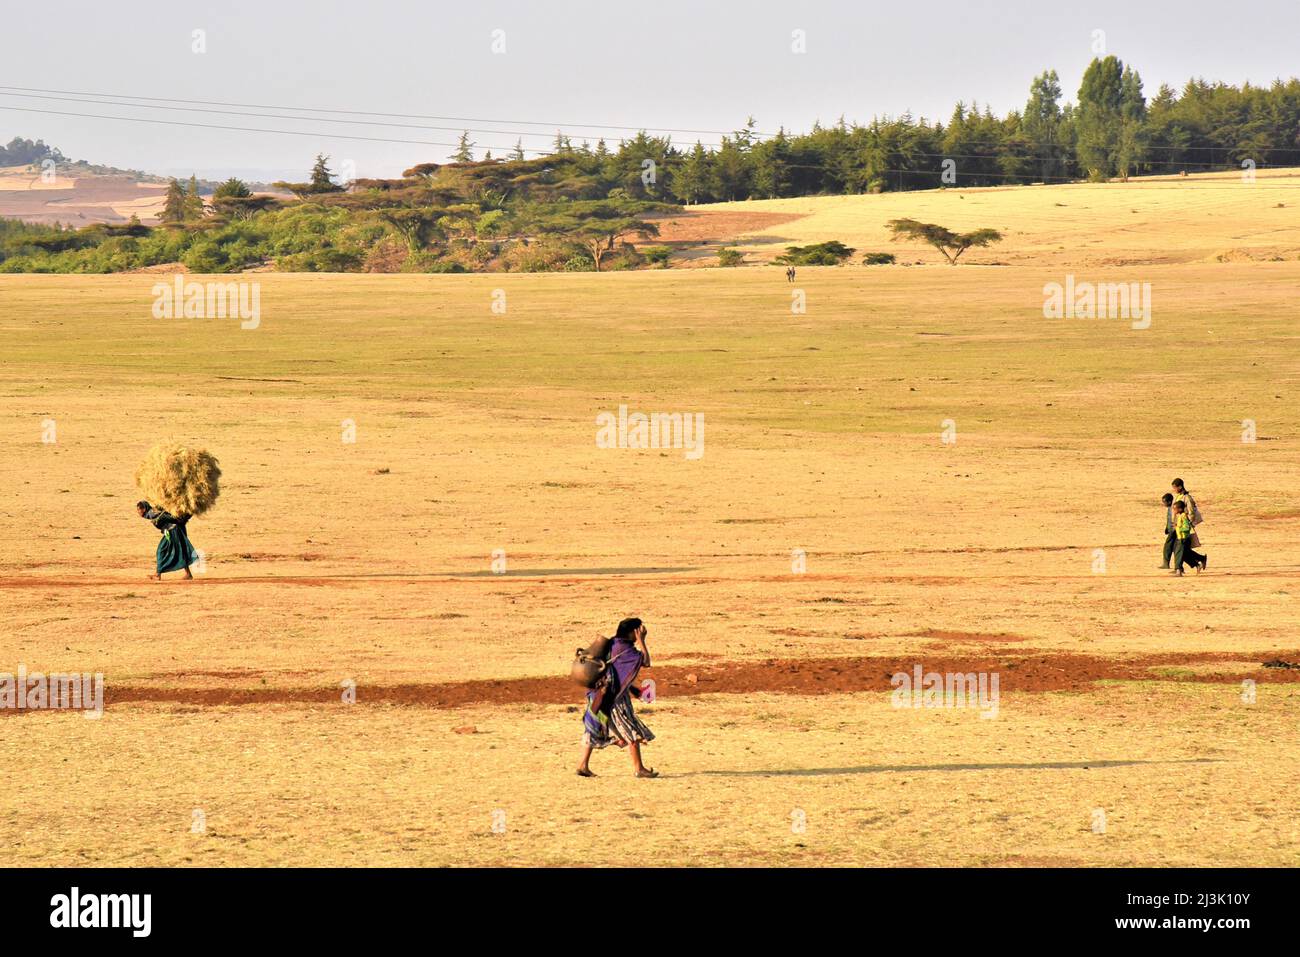 Carrying cattle fodder in rural Ethiopia; Ethiopia Stock Photo